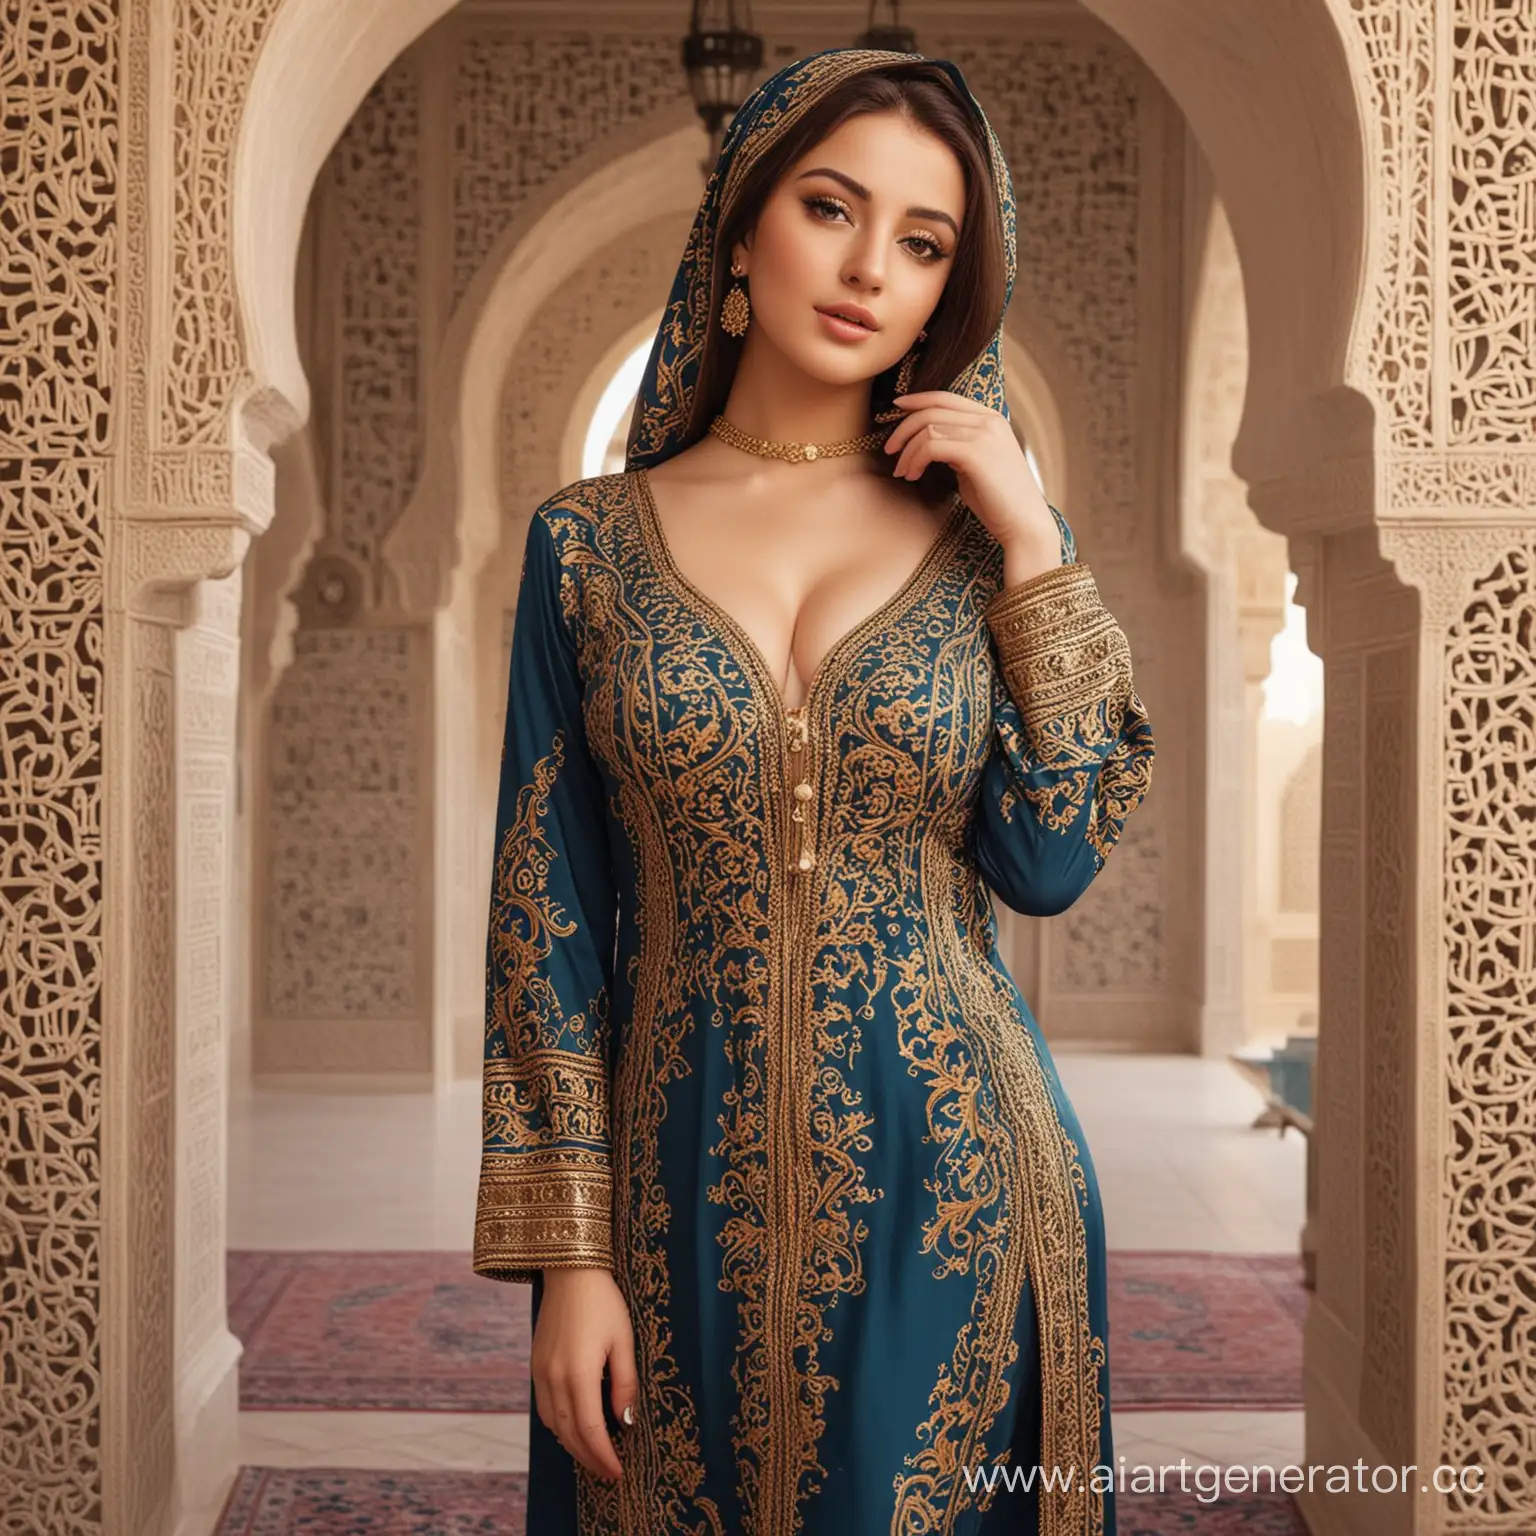 Elegant-Arabian-Woman-in-Traditional-Garb-with-Graceful-Curves